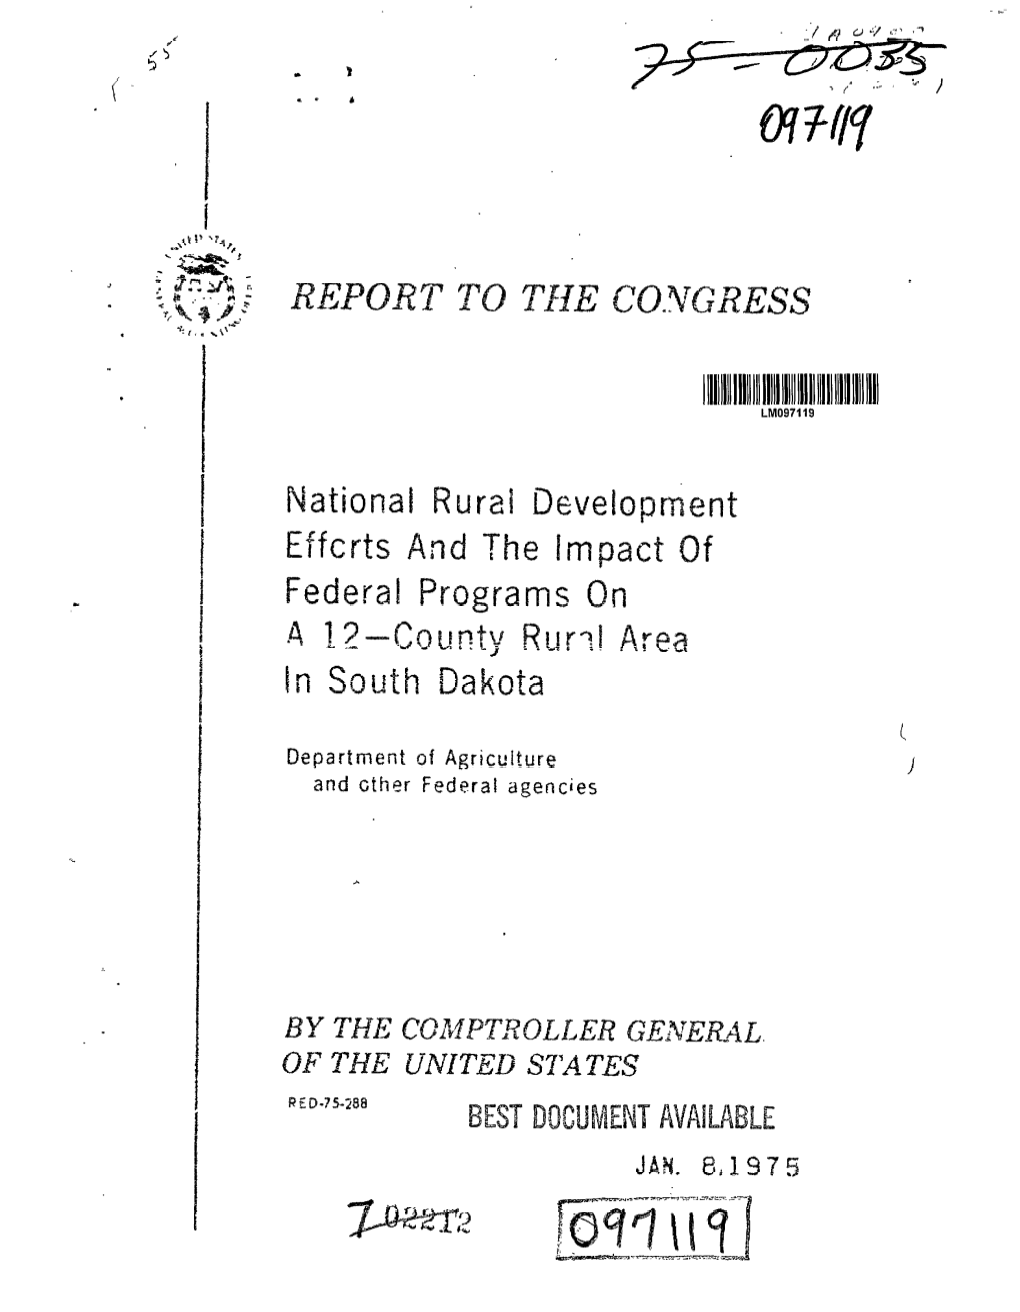 RED-75-288 National Rural Development Efforts and the Impact